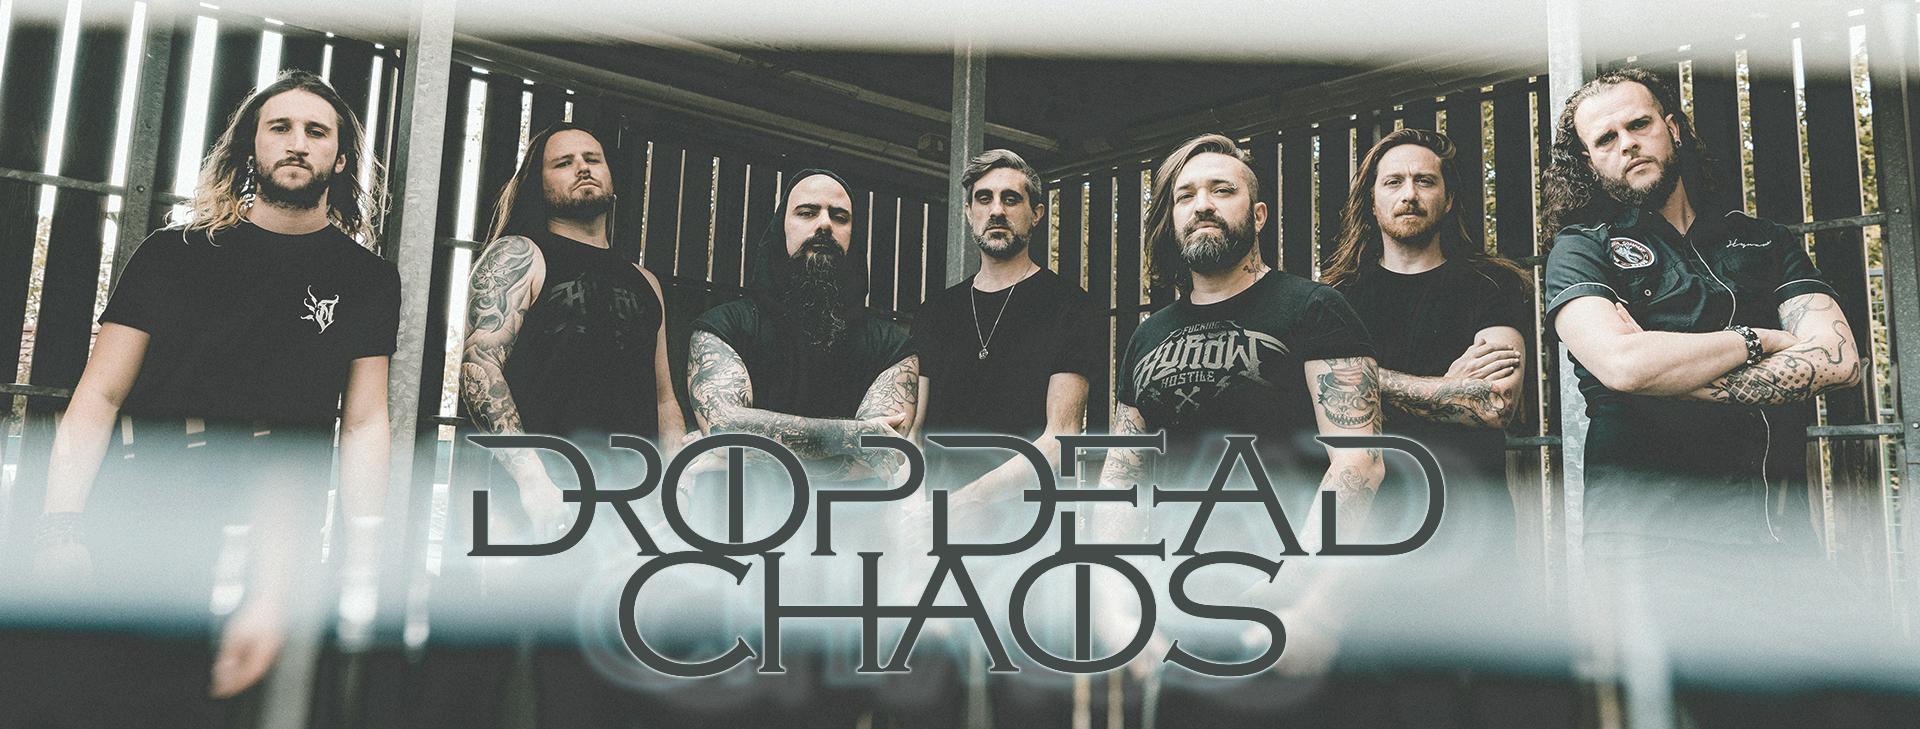 Dropdead chaos 2022